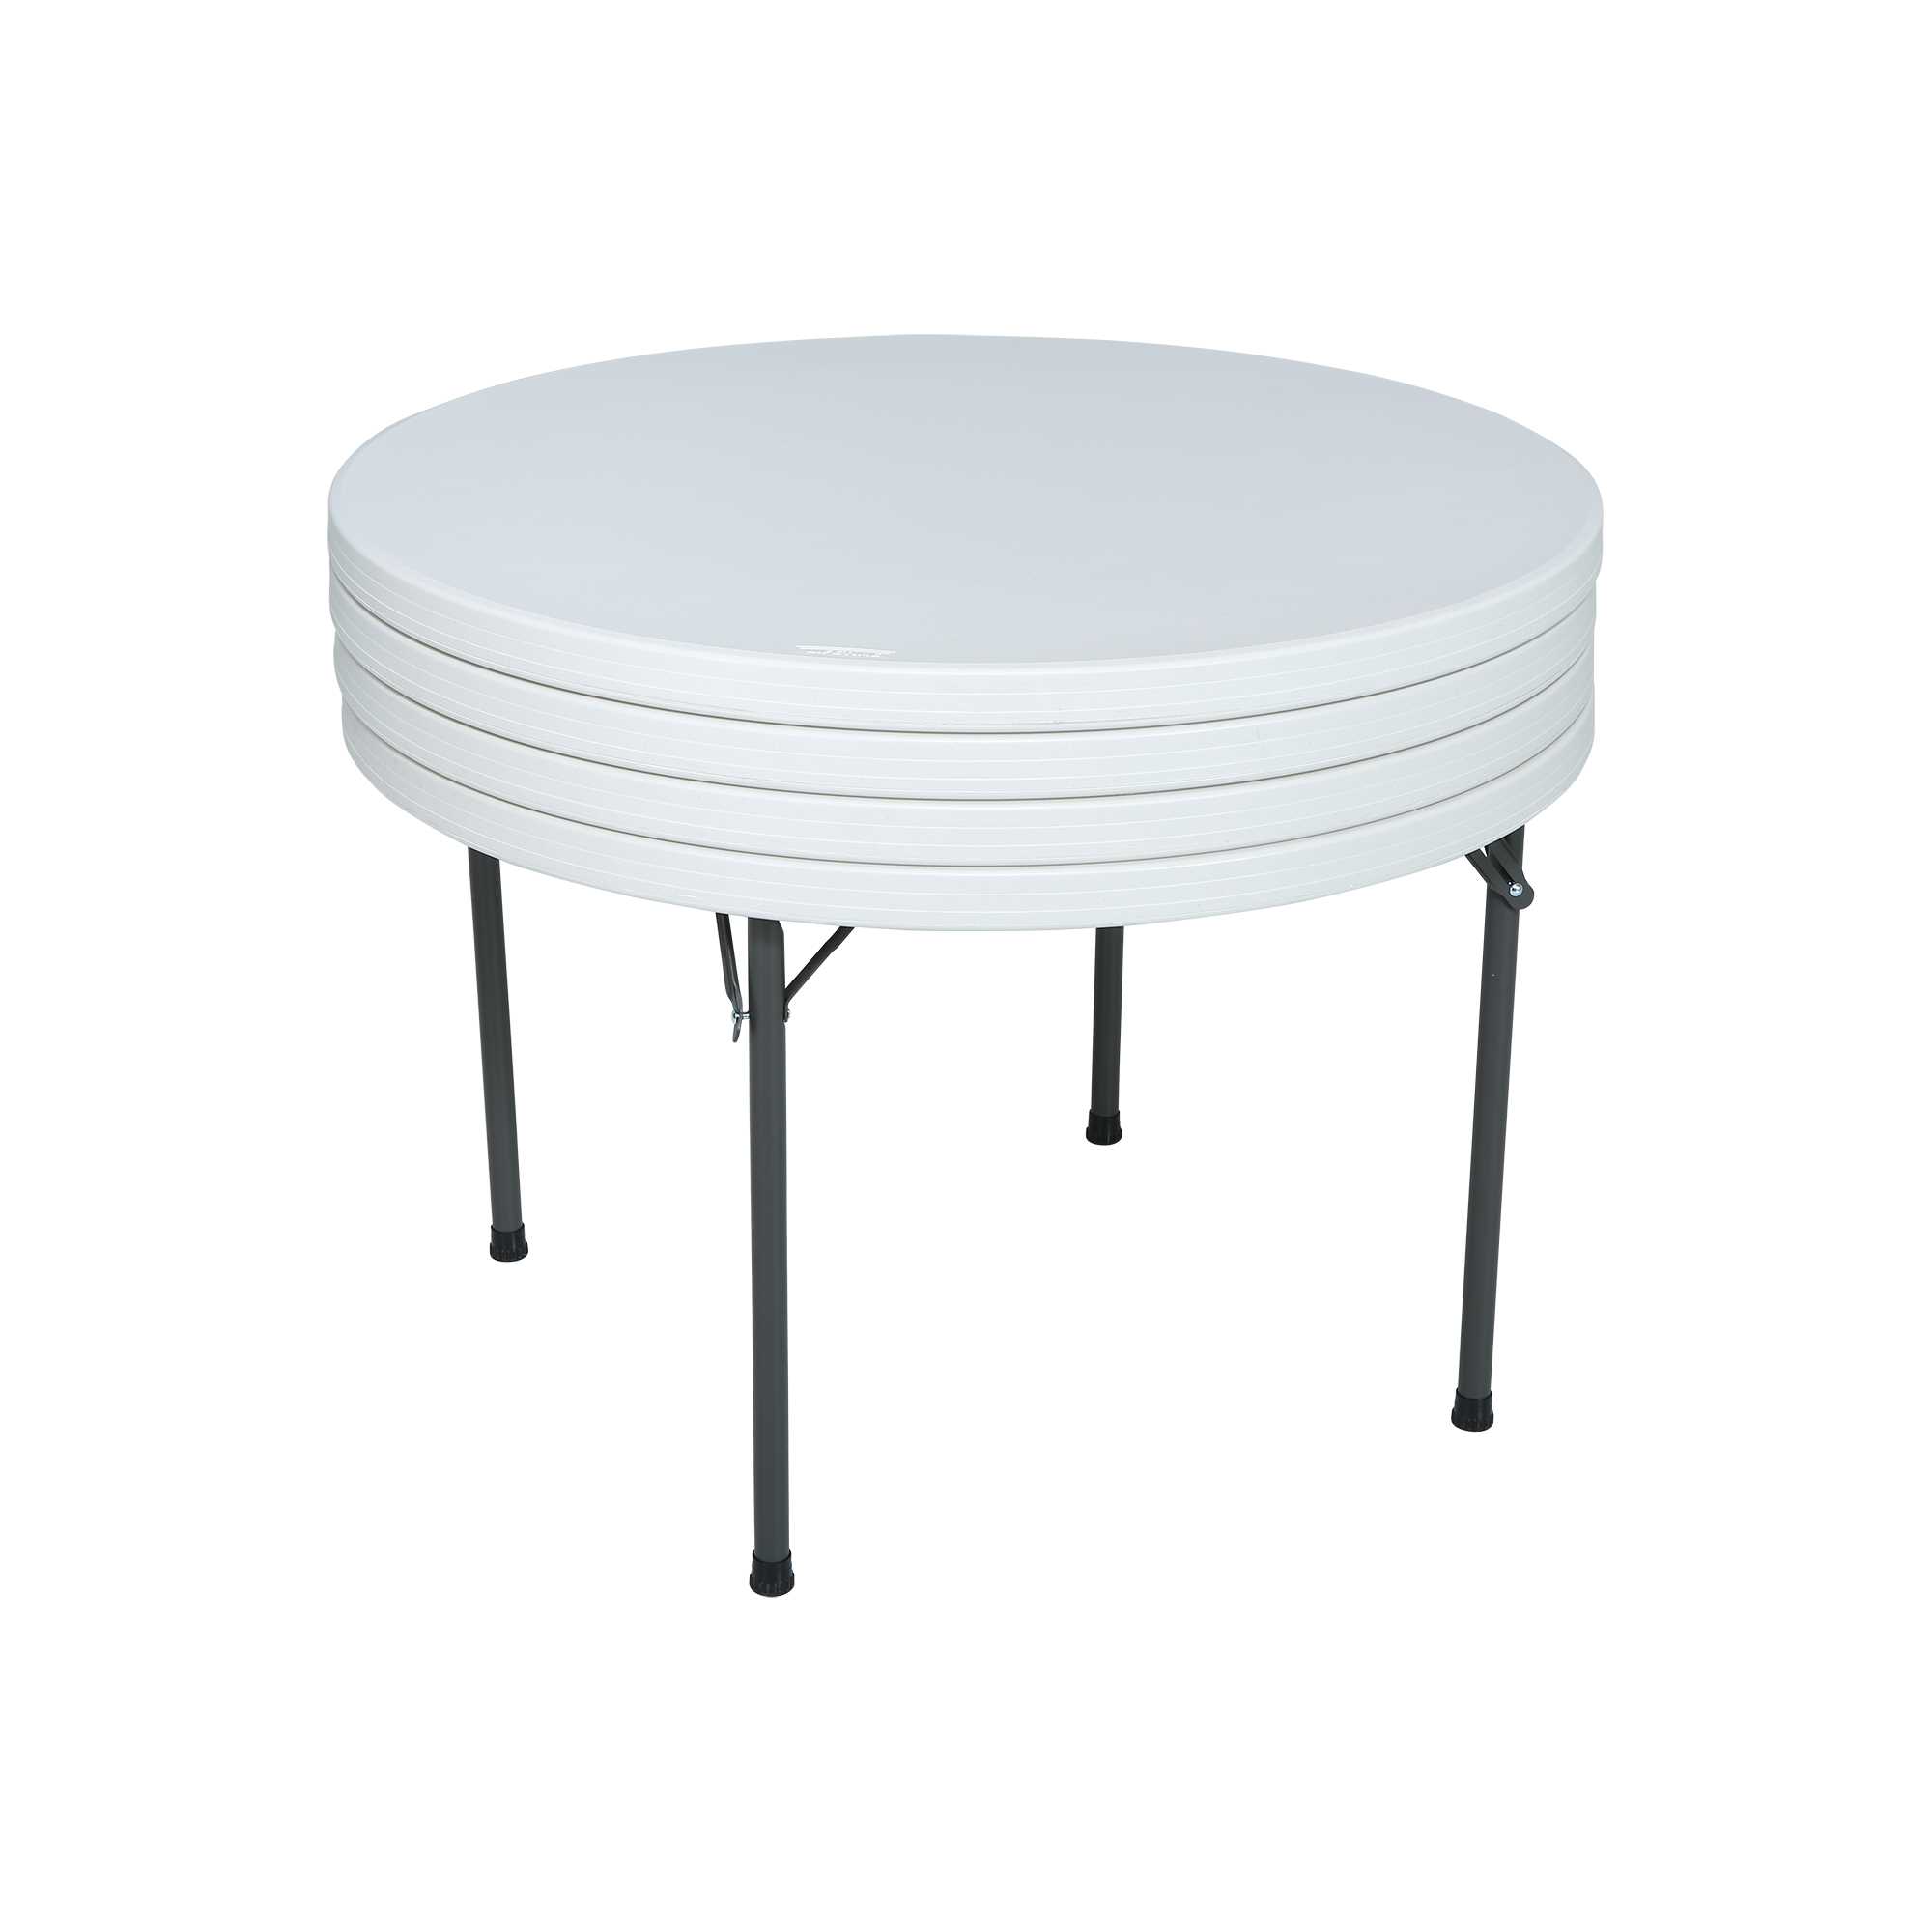 48-inch Round folding table 122cm Dia / 4-6 people / heavy commercial